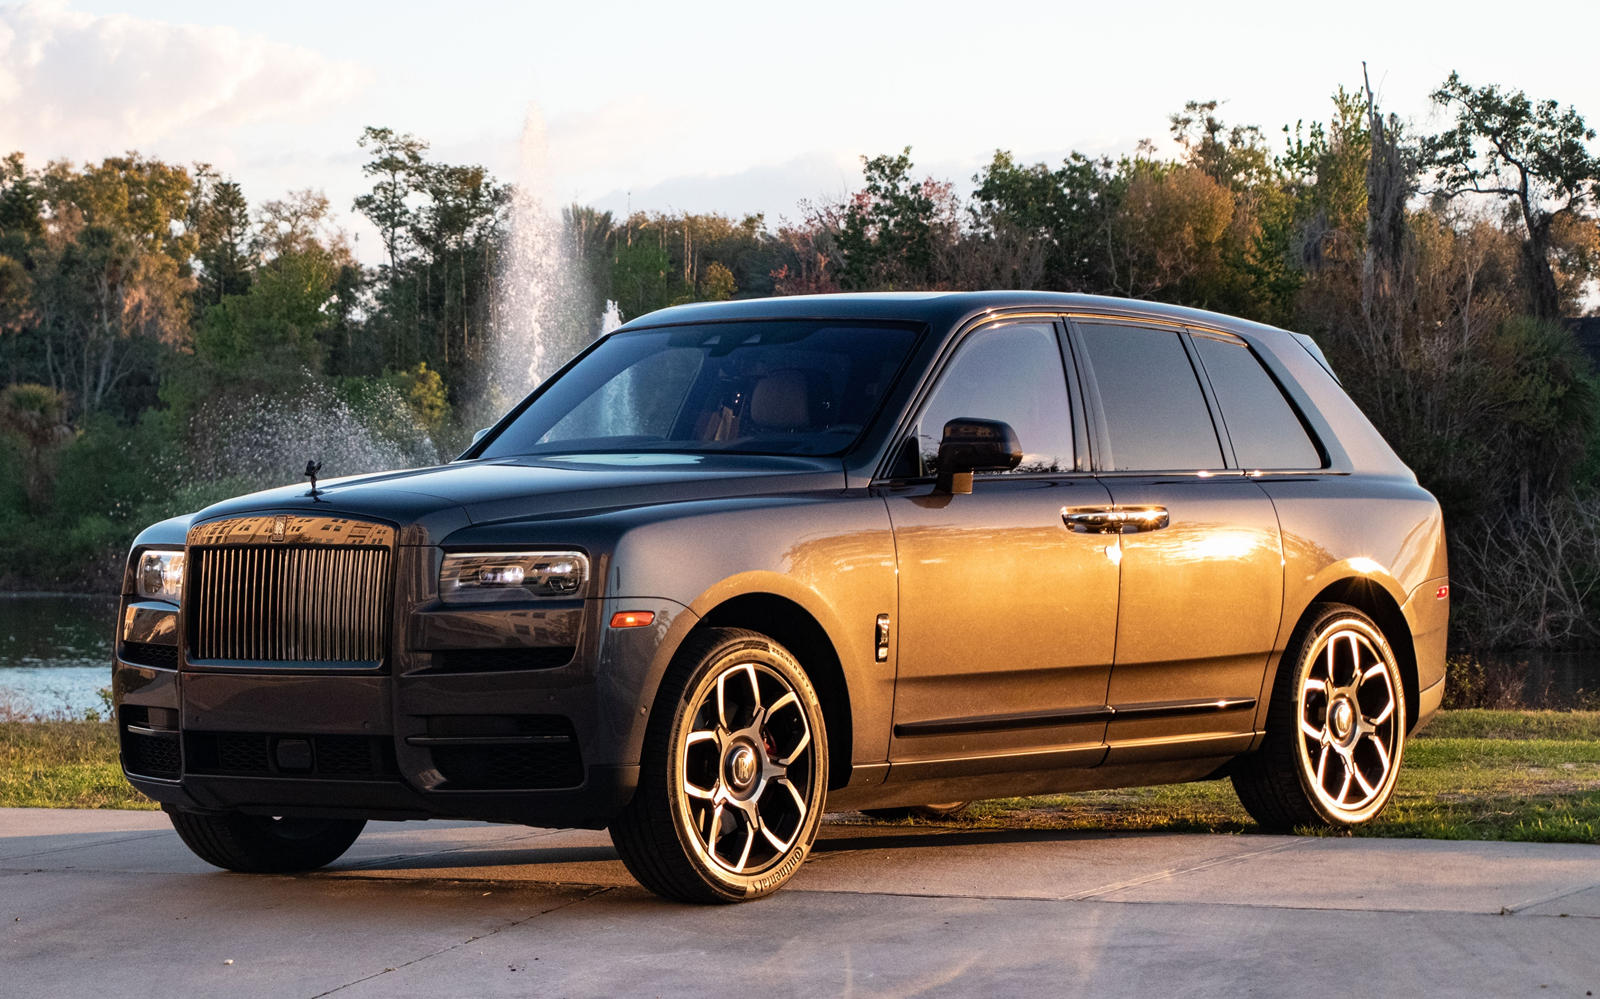 Rolls-Royce Black Badge Cullinan SUV Pictures, Specs, Details